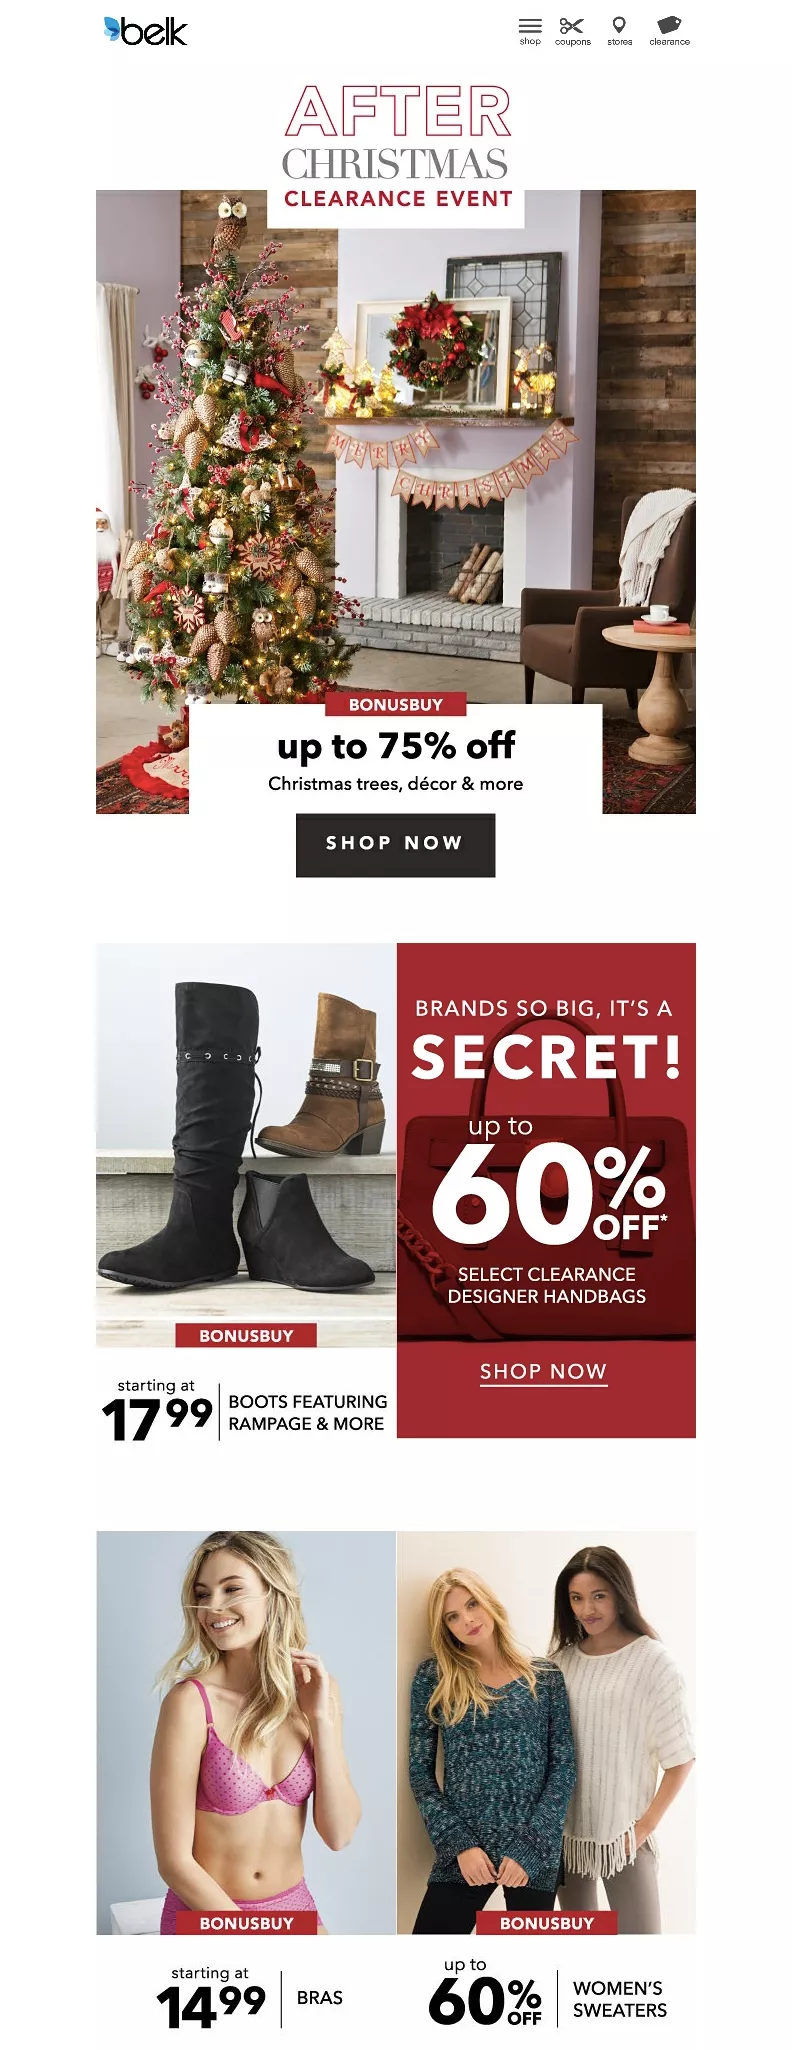 after christmas clearance sale of chlotes and home goods